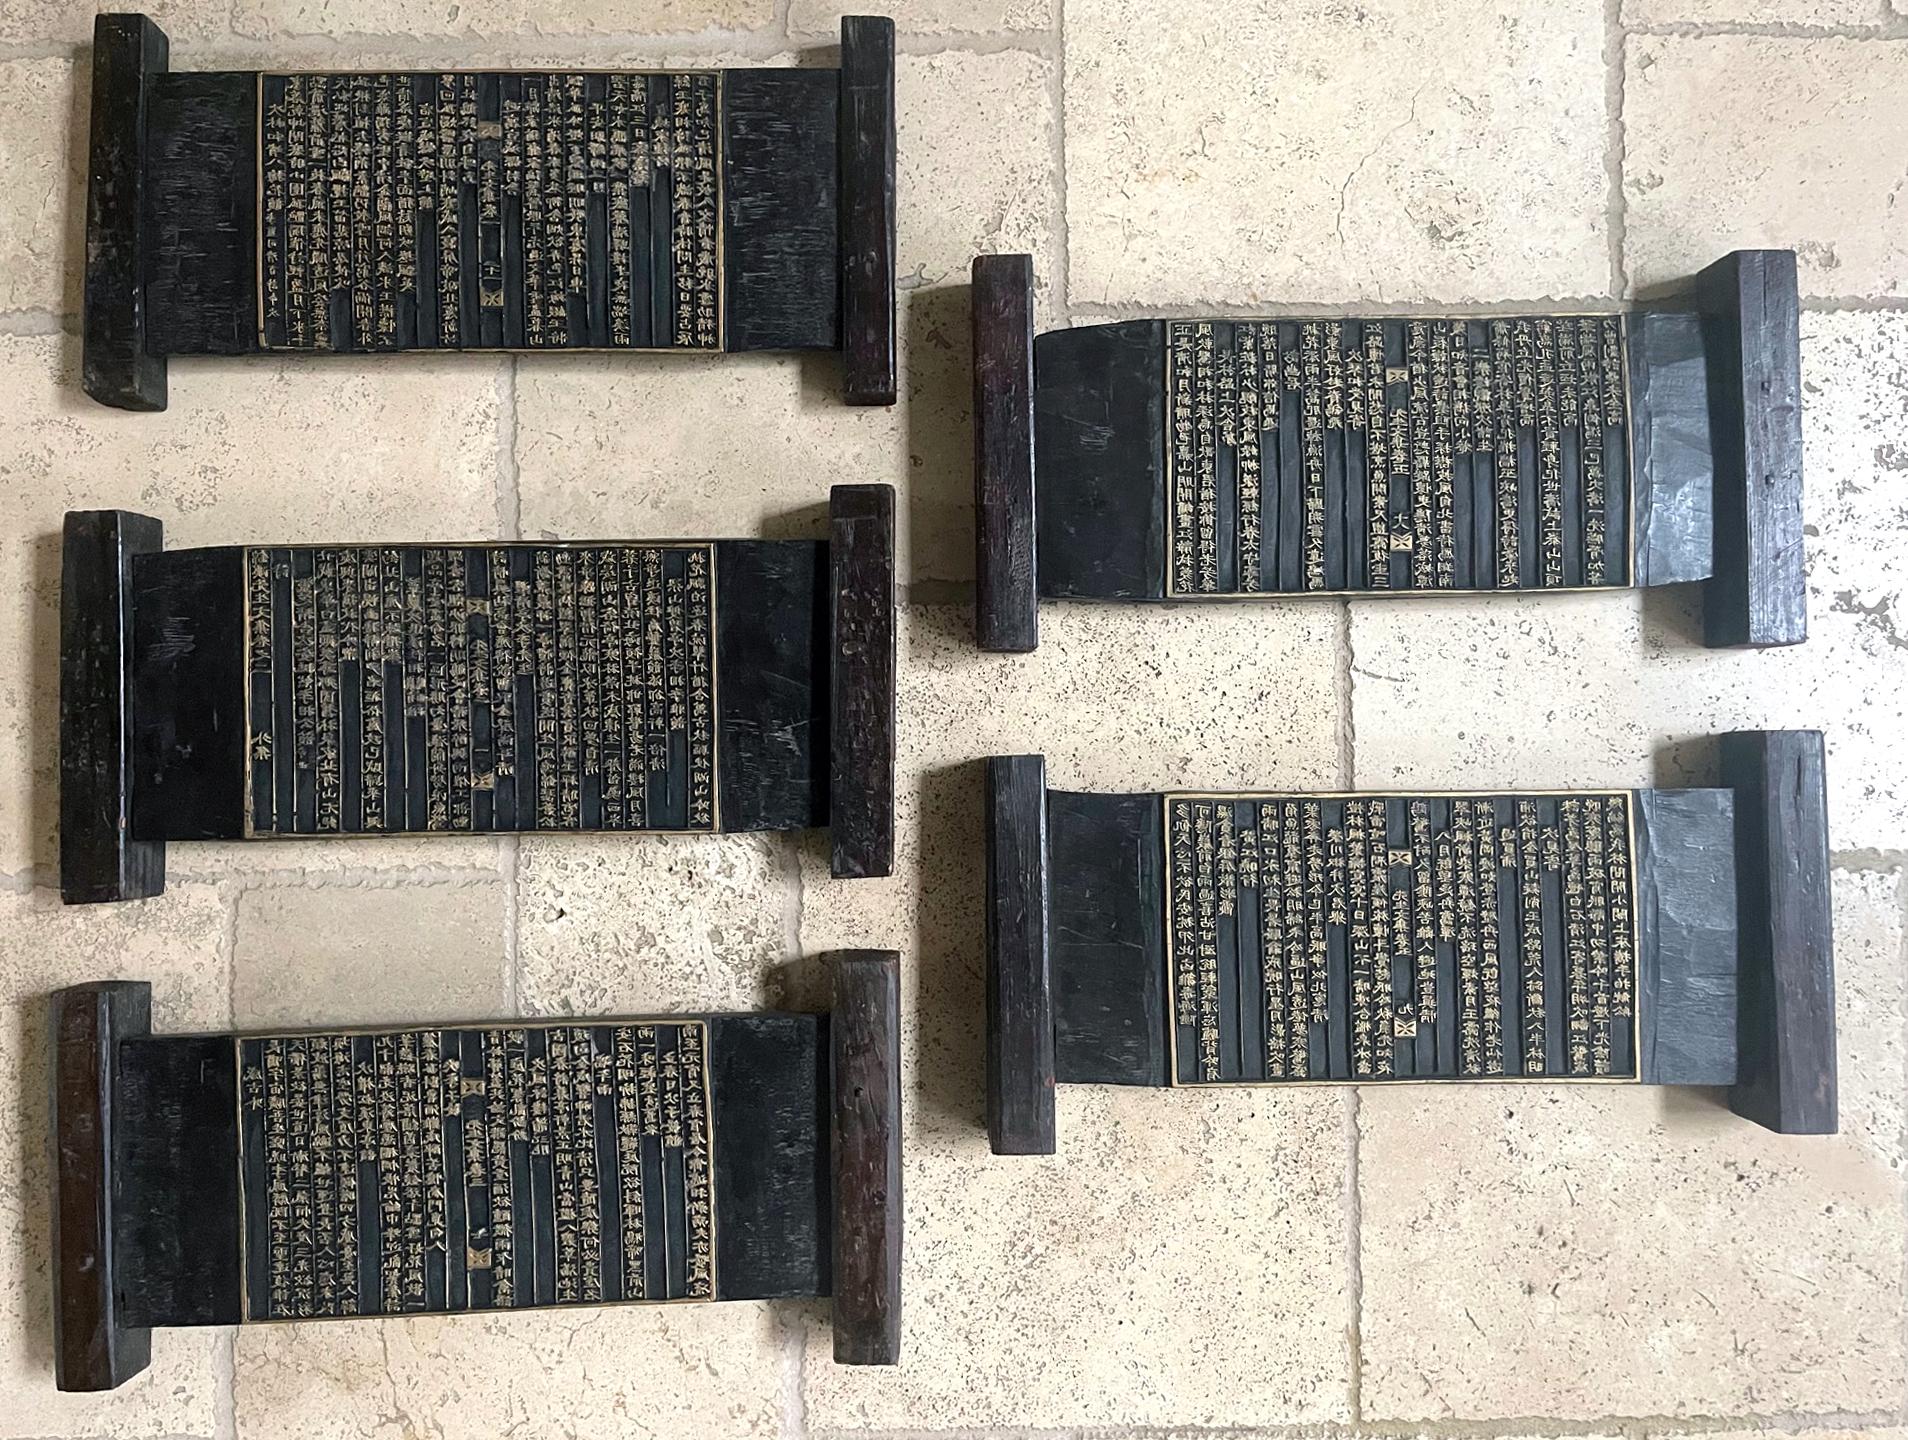 A set of five carved wood print blocks from Korea circa 1900s (late Joseon to early Korean Empire period). Constructed and hand-chiseled from hardwood, the printing blocks were finely carved on both sides in Chinese (Hanja) for the book 